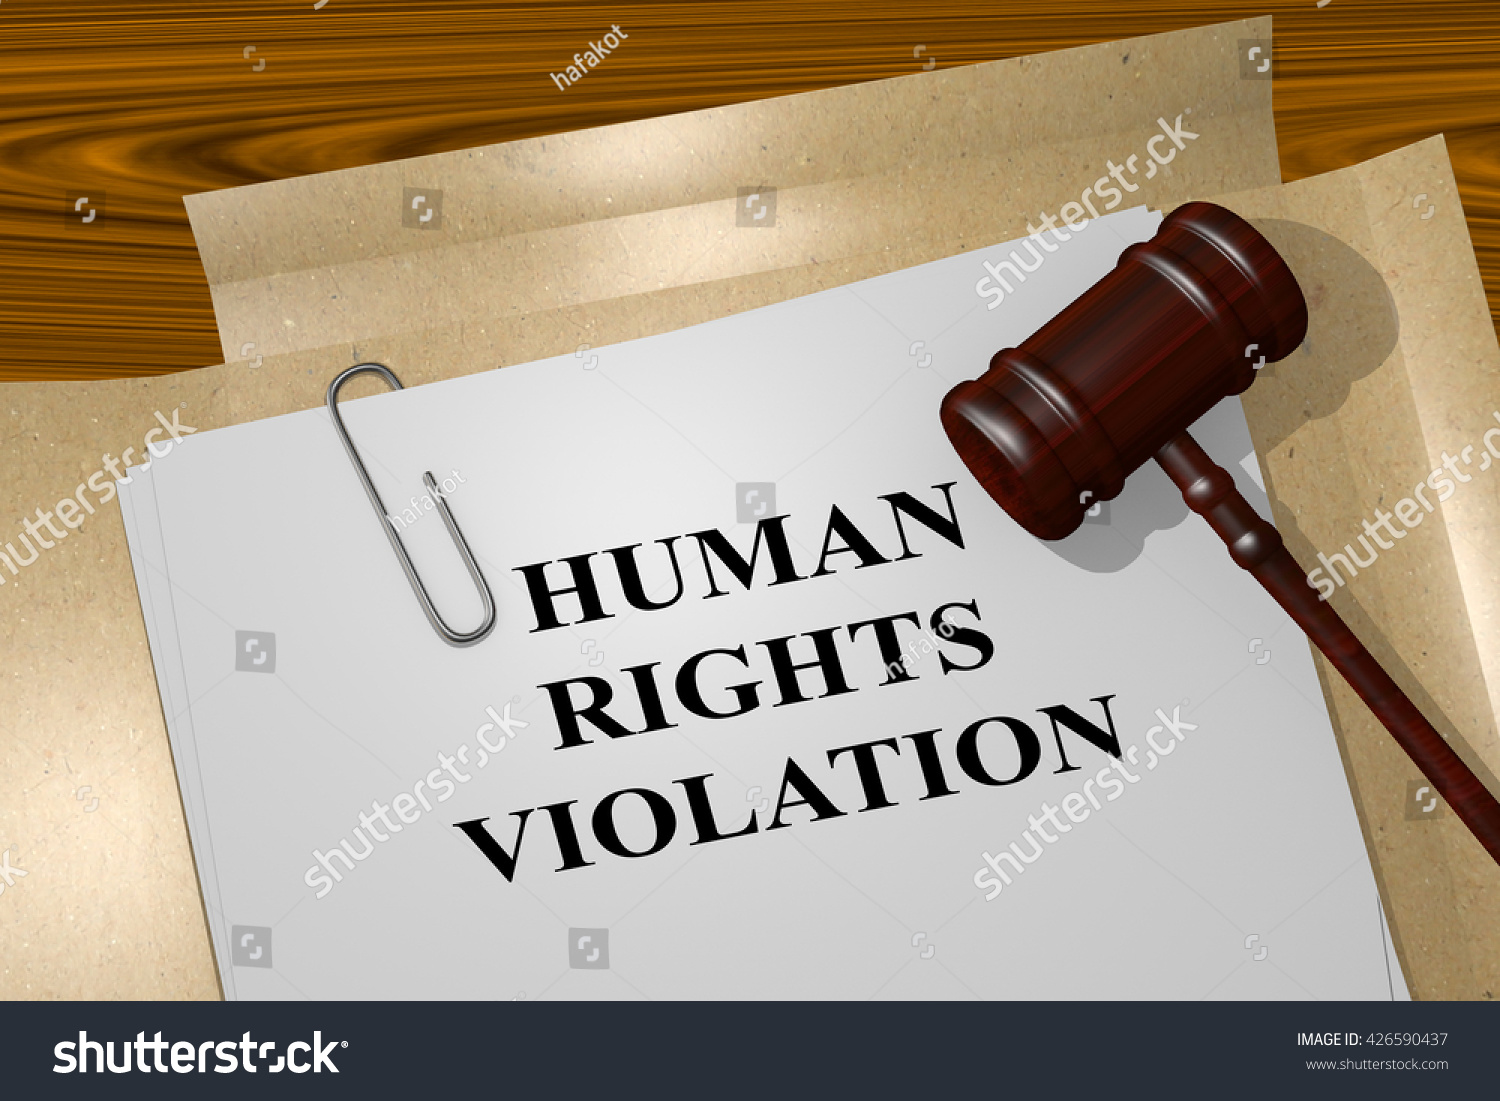 3D illustration of "HUMAN RIGHTS VIOLATION" title on Legal Documents. Legal concept.